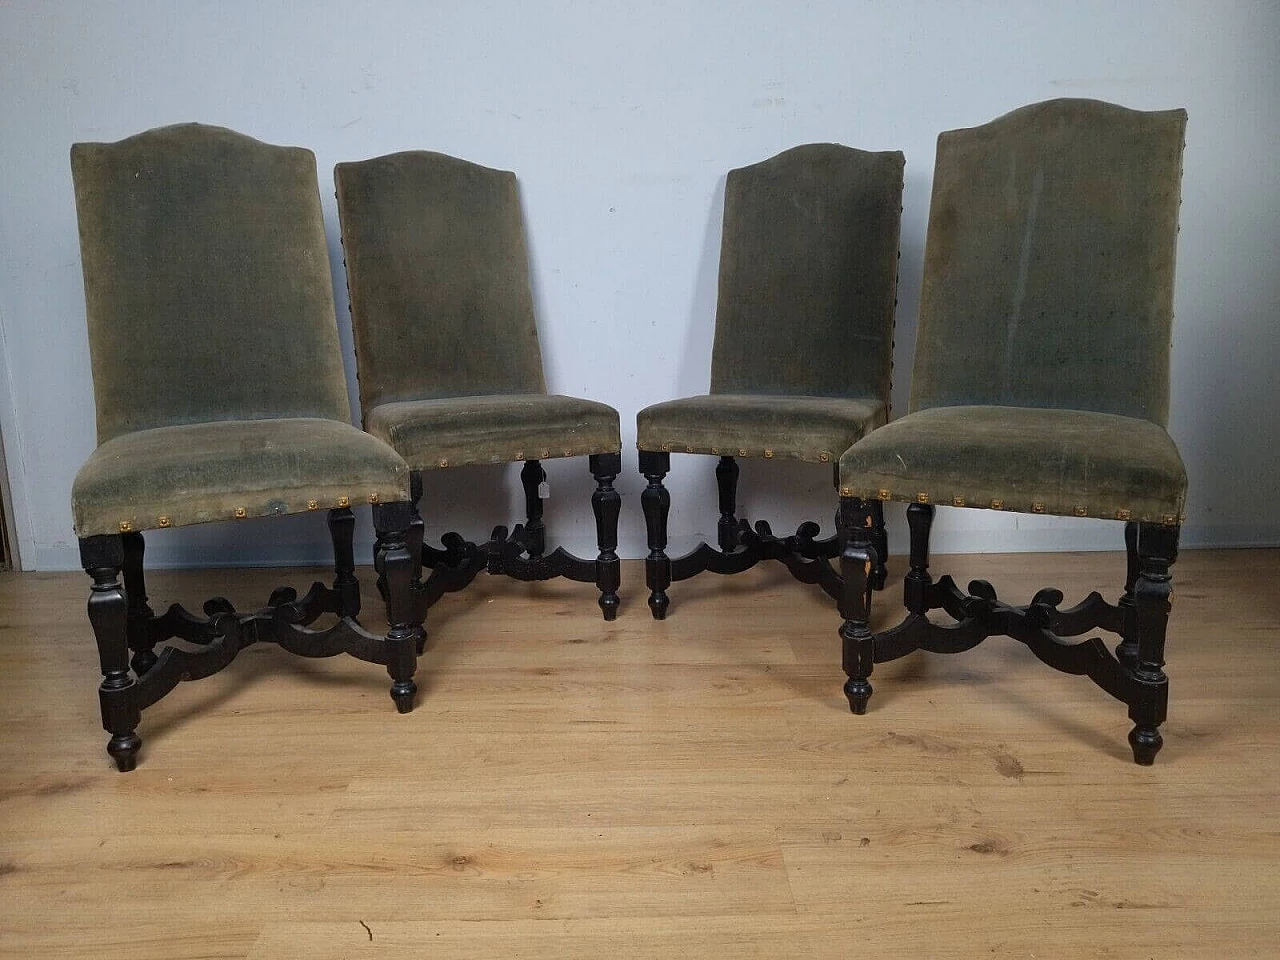 4 Rocchetto chairs in ebonised wood, 18th century 10